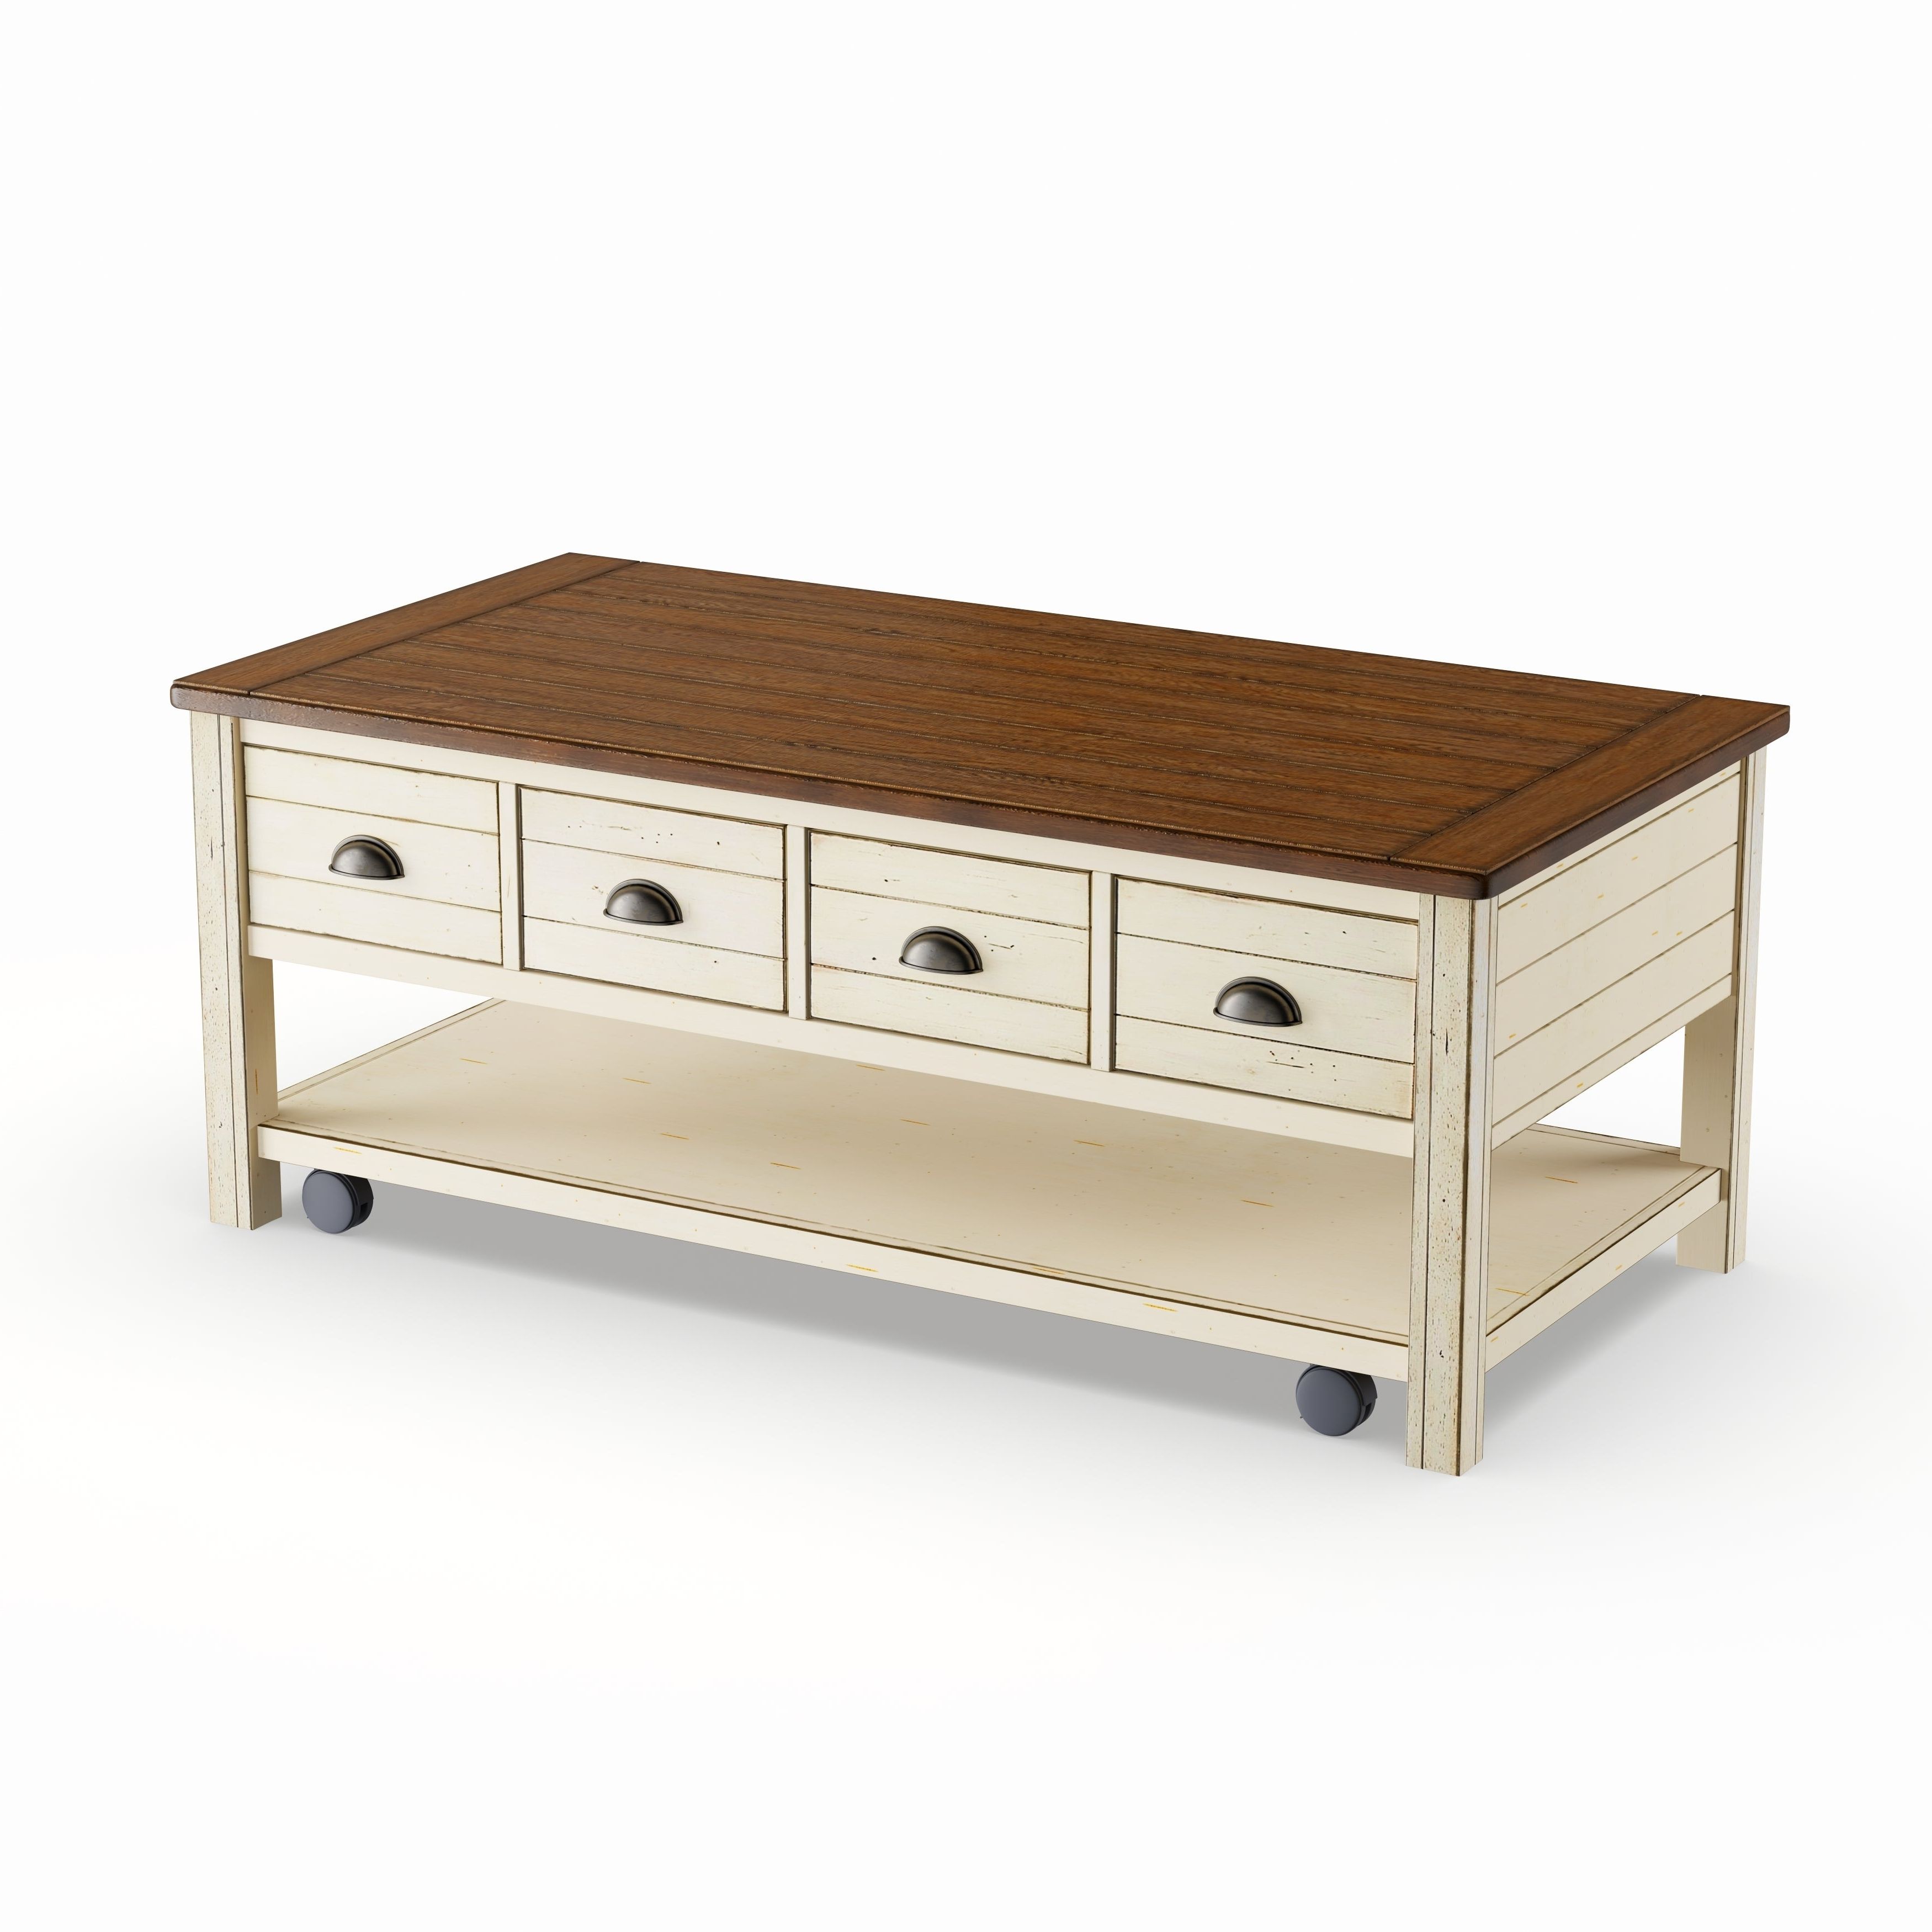 2019 Winslet Cherry Finish Wood Oval Coffee Tables With Casters Intended For Copper Grove Torngatalabaster Storage Coffee Table With Casters (View 12 of 20)